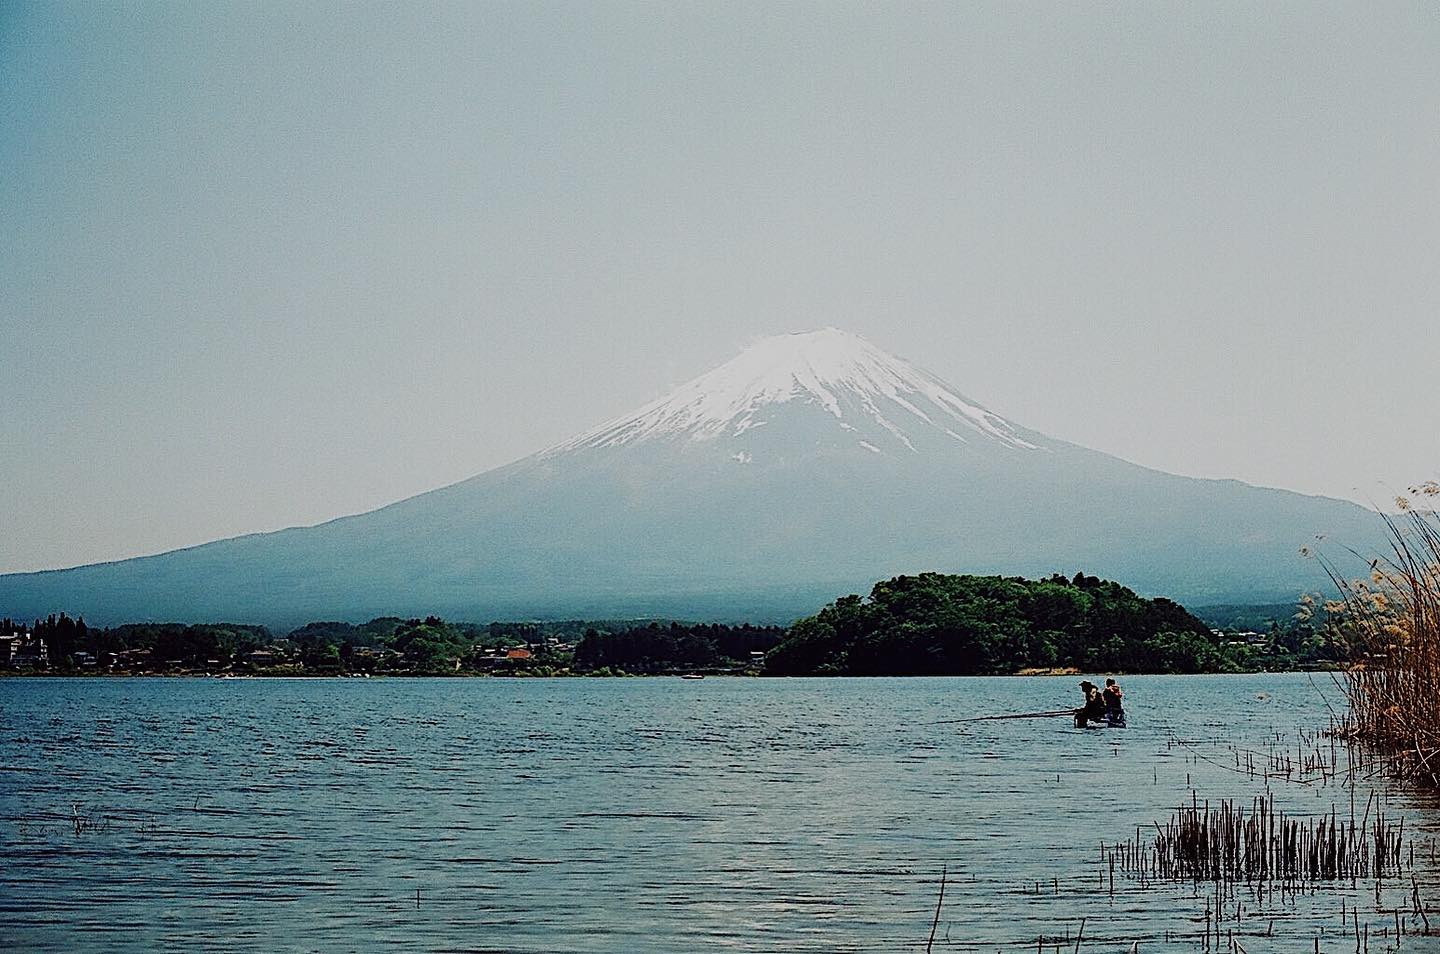 _﻿
Here's this week's update of from AOI Global at Lake Kawaguchi, Yamanashi Pref.﻿
﻿
There are several lakes around Mt. Fuji and they are often known as "Fujigoko / Fuji Five Lakes". Lake Kawaguchi is also one of them.﻿
﻿
#aoiglobal  #shootinglocation  #filmmakinglife 